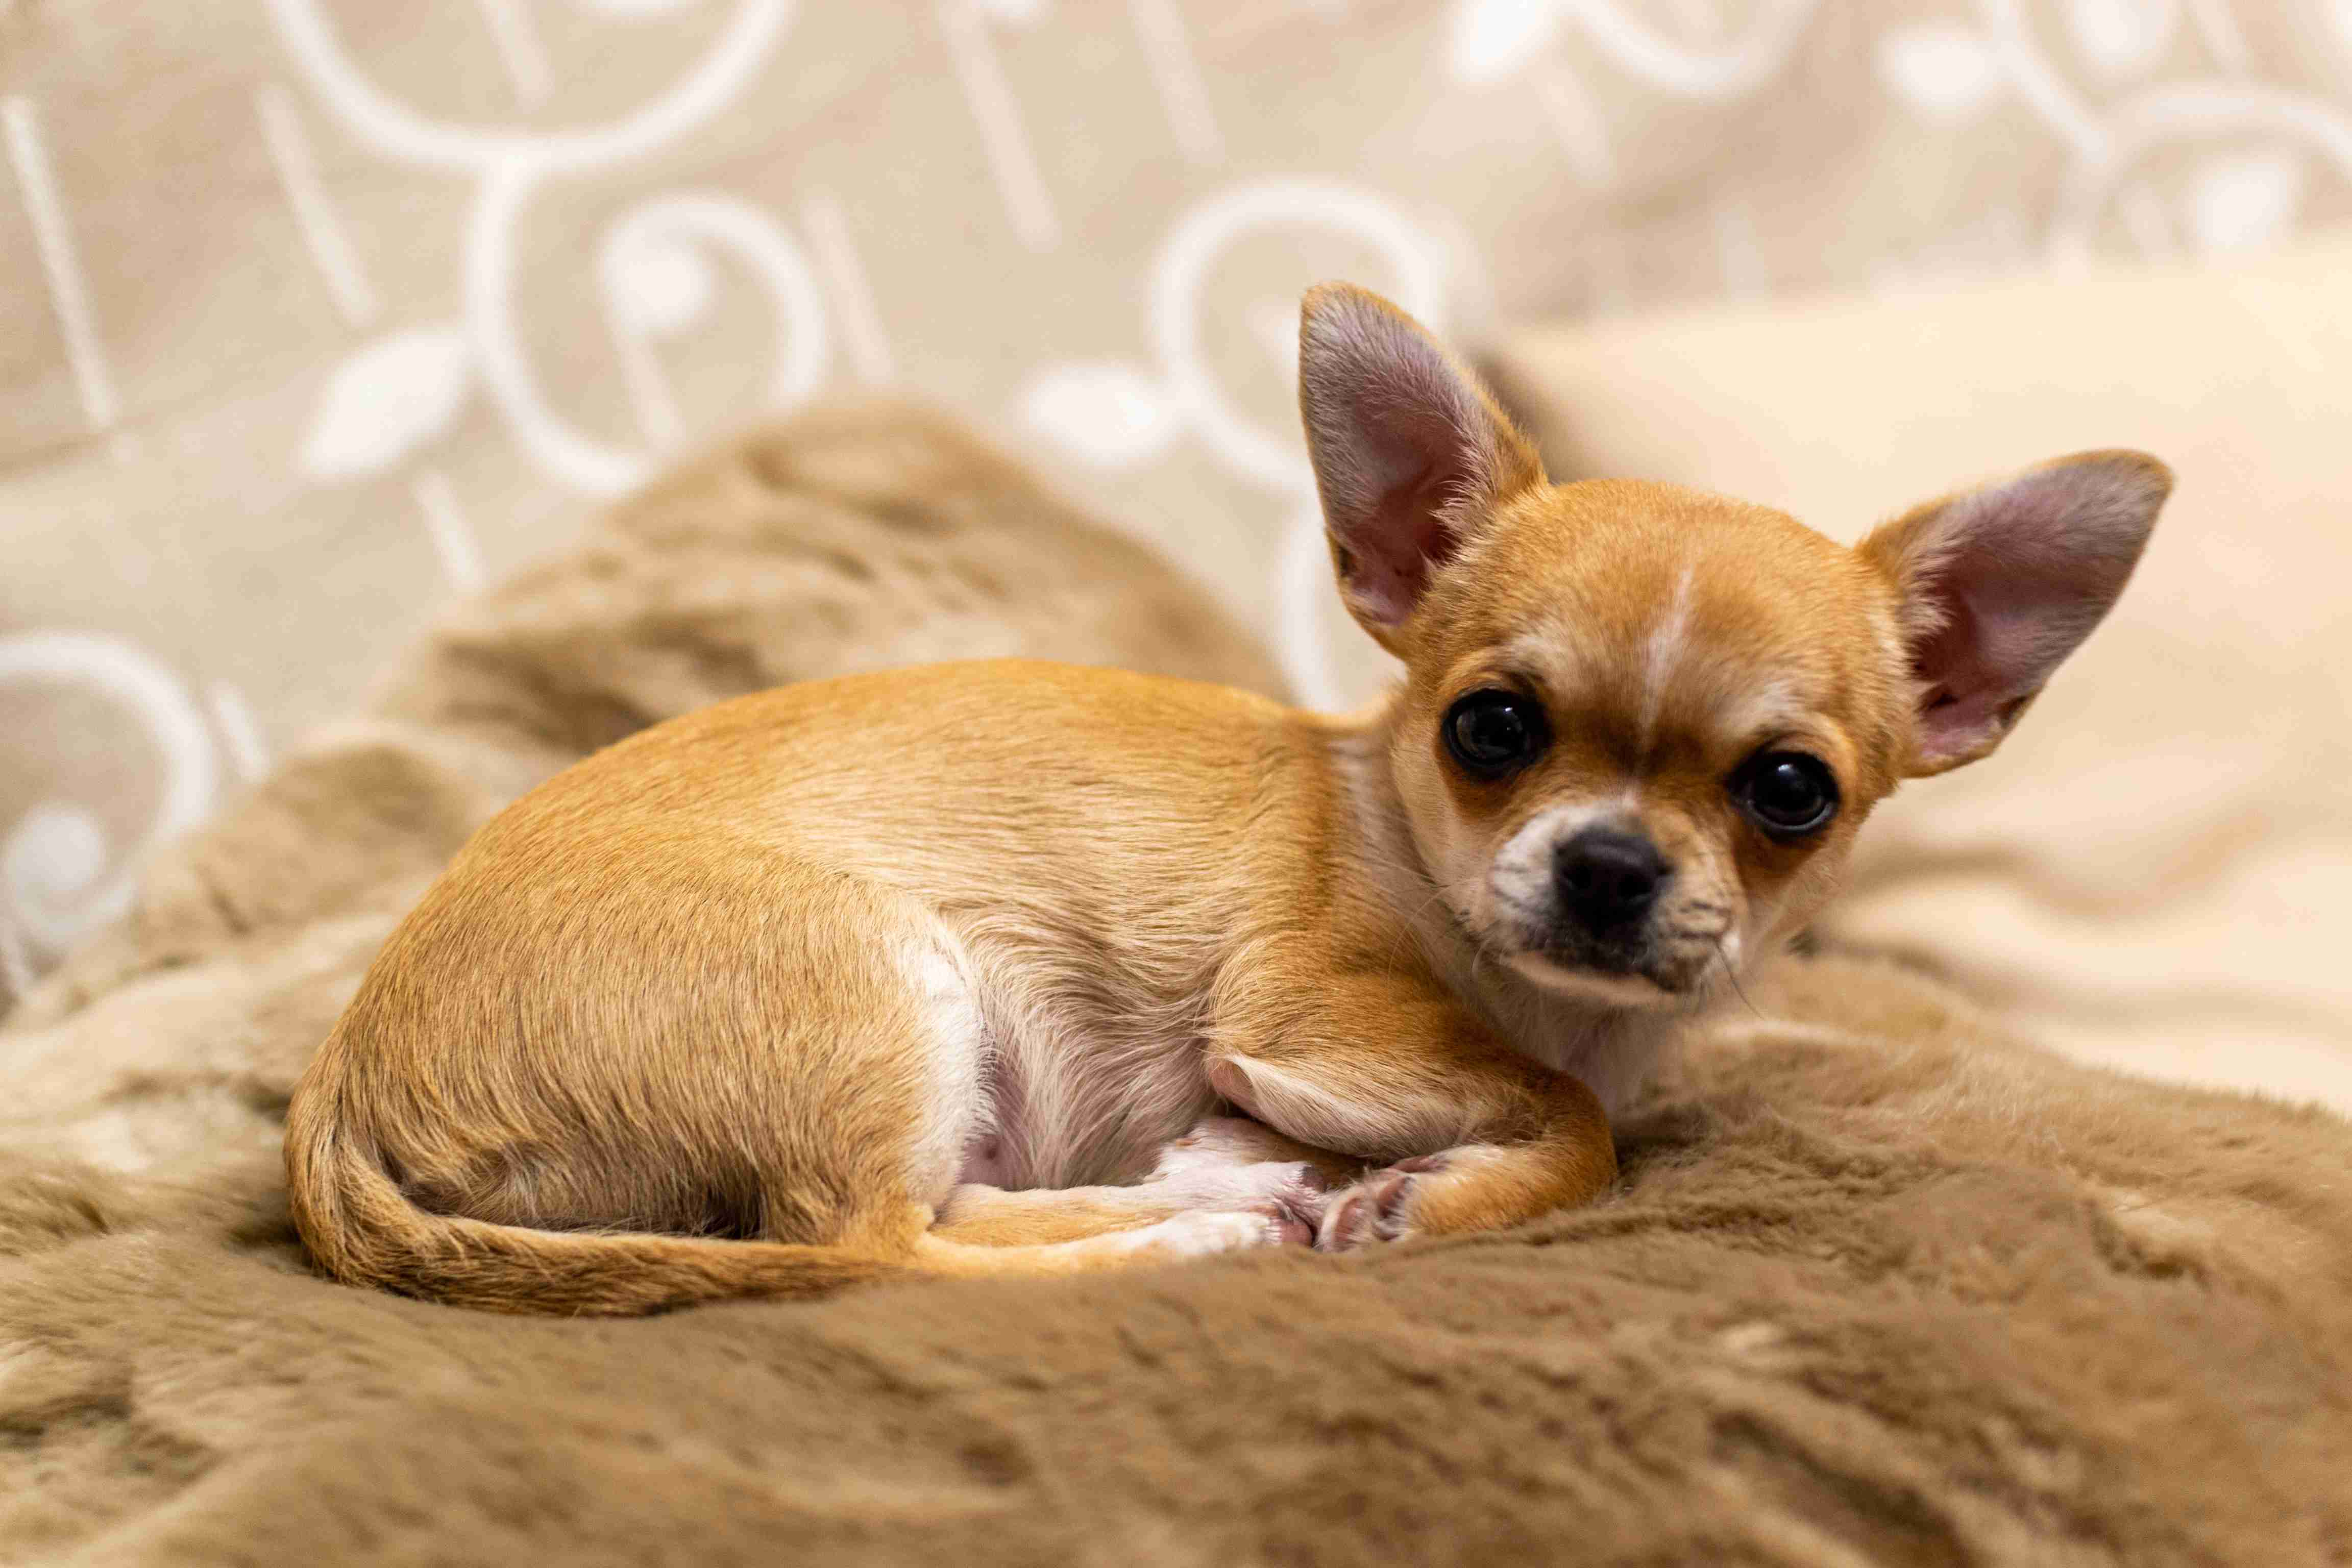 How can you help a Chihuahua feel more secure and less prone to anger when in unfamiliar environments?